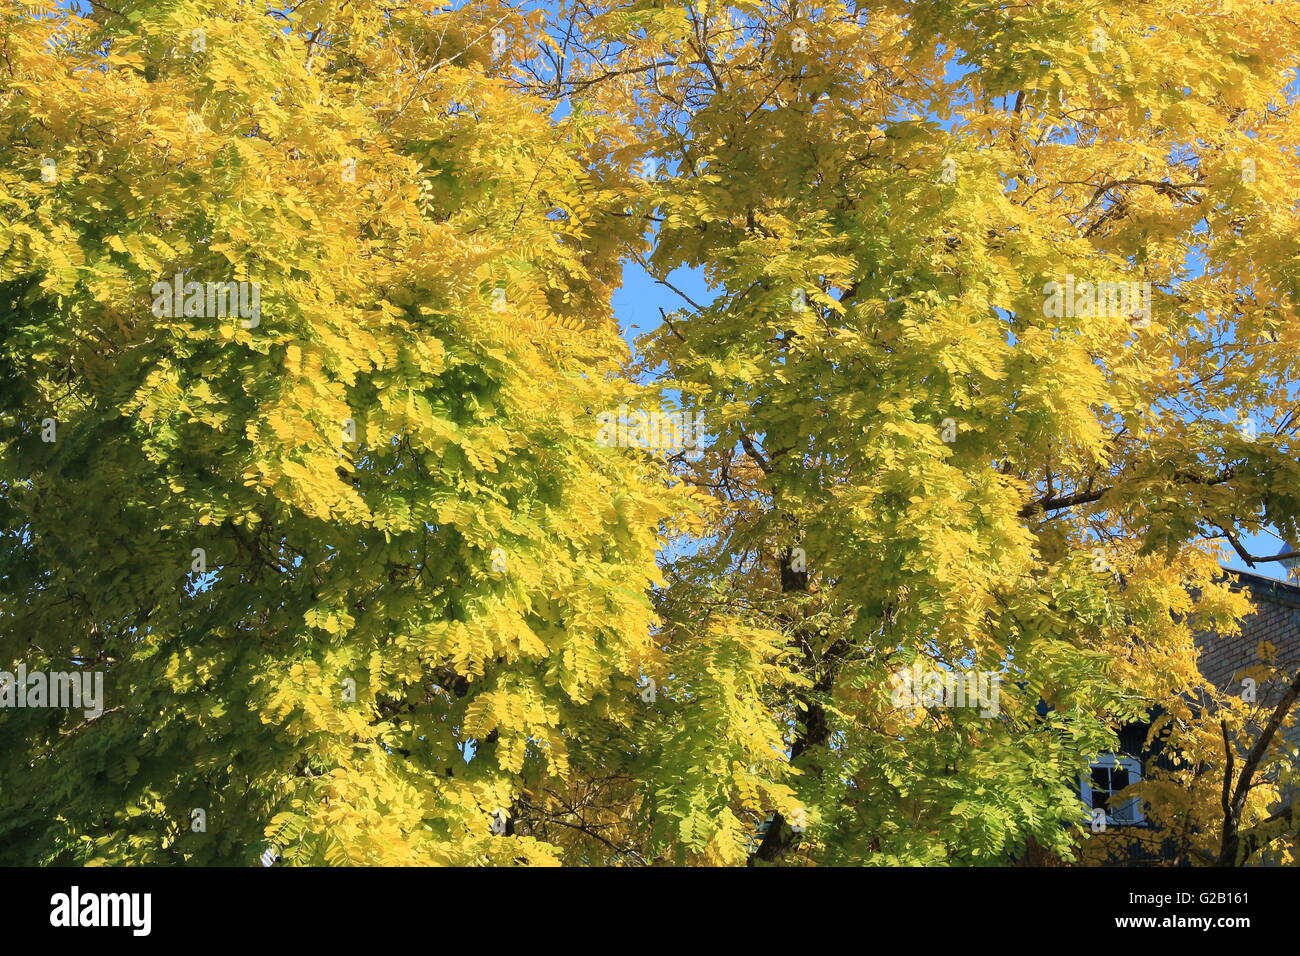 Autumn foliage of a tree in Auckland, New Zealand Stock Photo